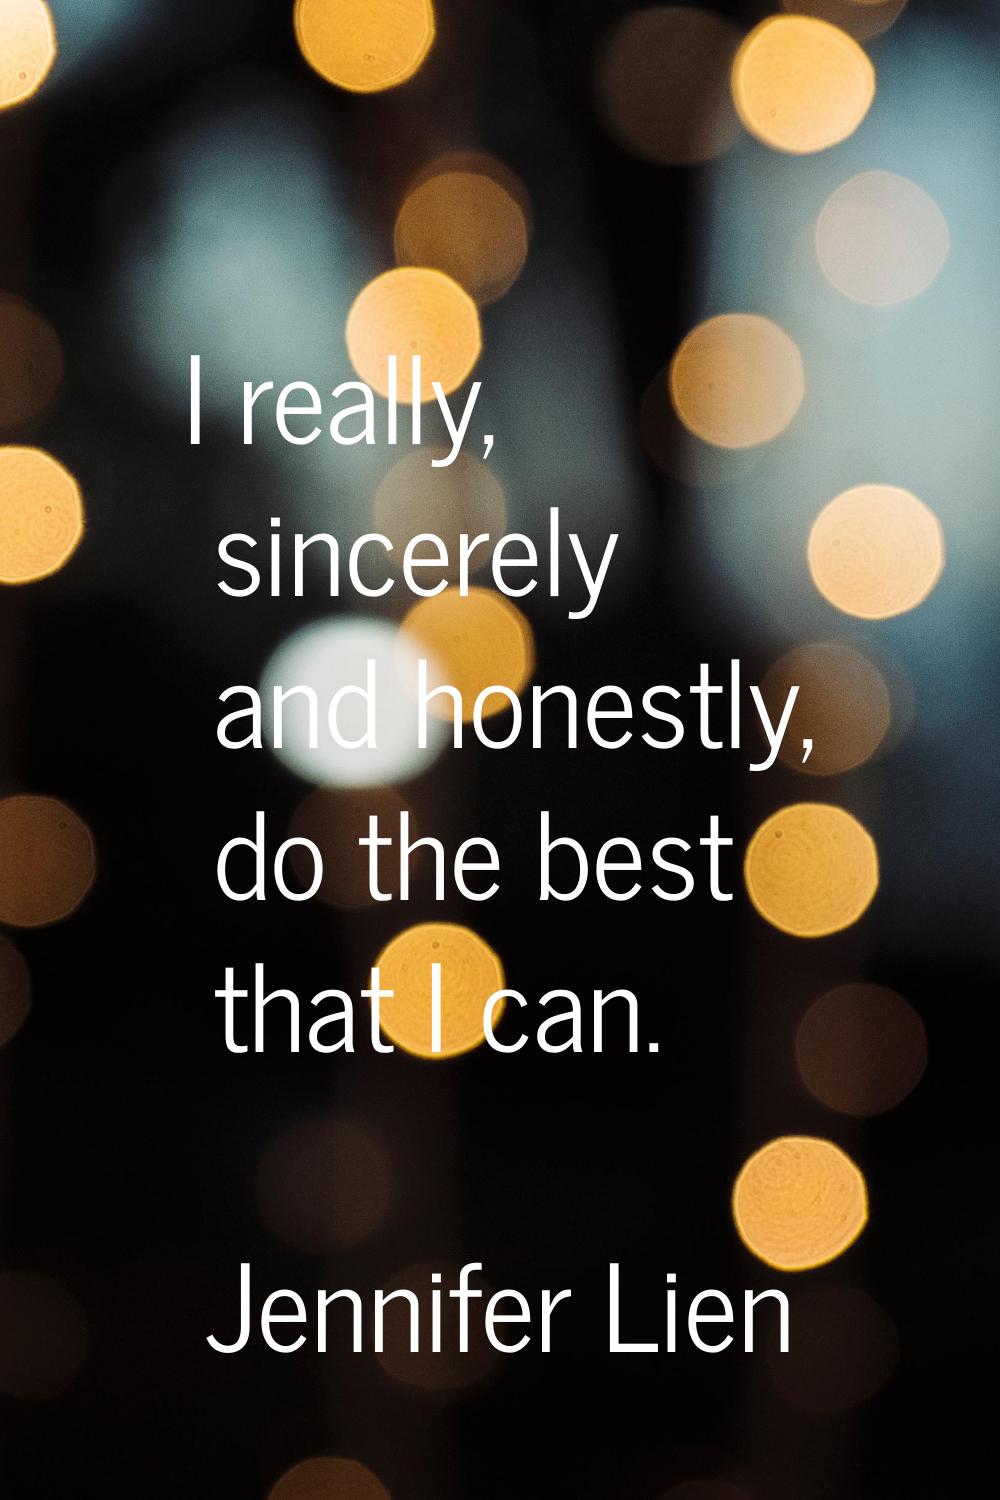 I really, sincerely and honestly, do the best that I can.